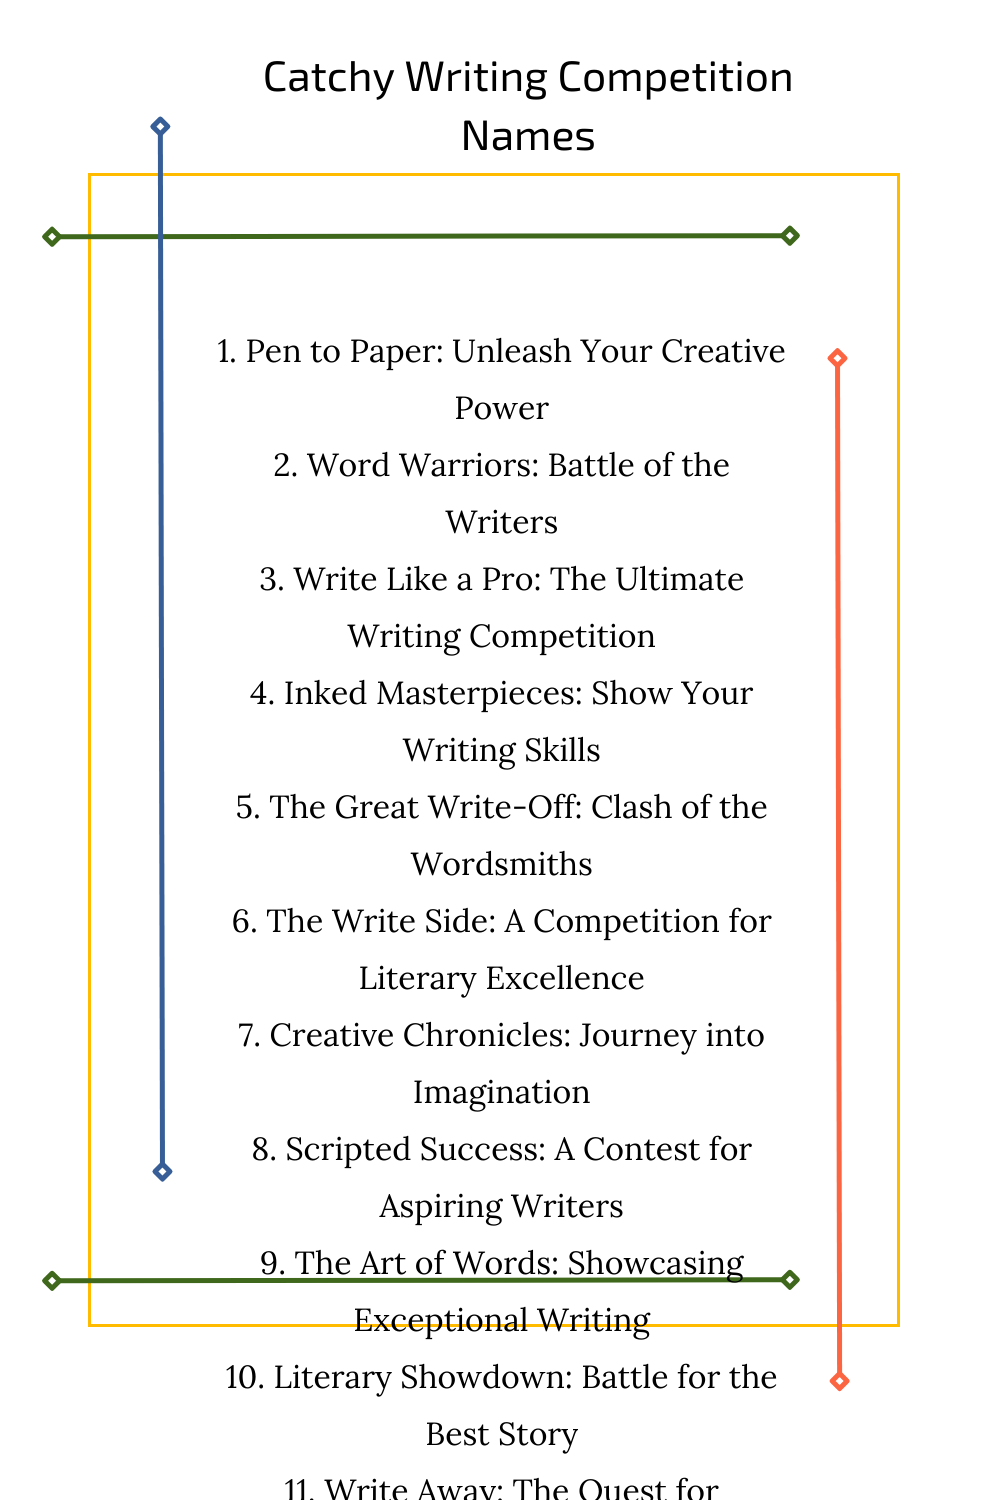 Catchy Writing Competition Names